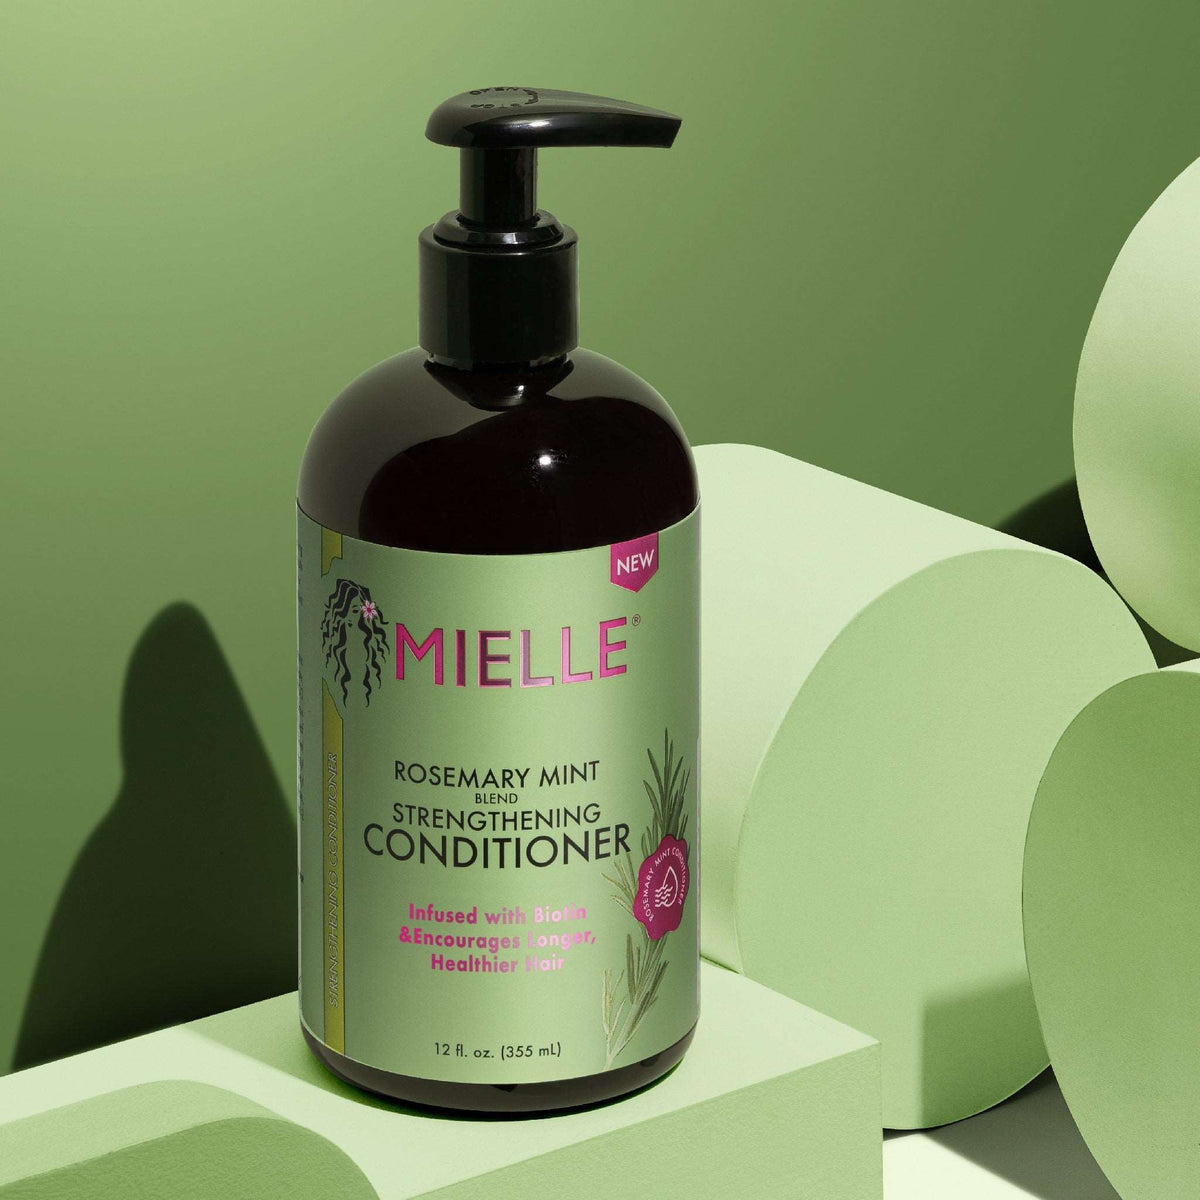 APRÈS-SHAMPOING MIELLE ROSE MARY MINT